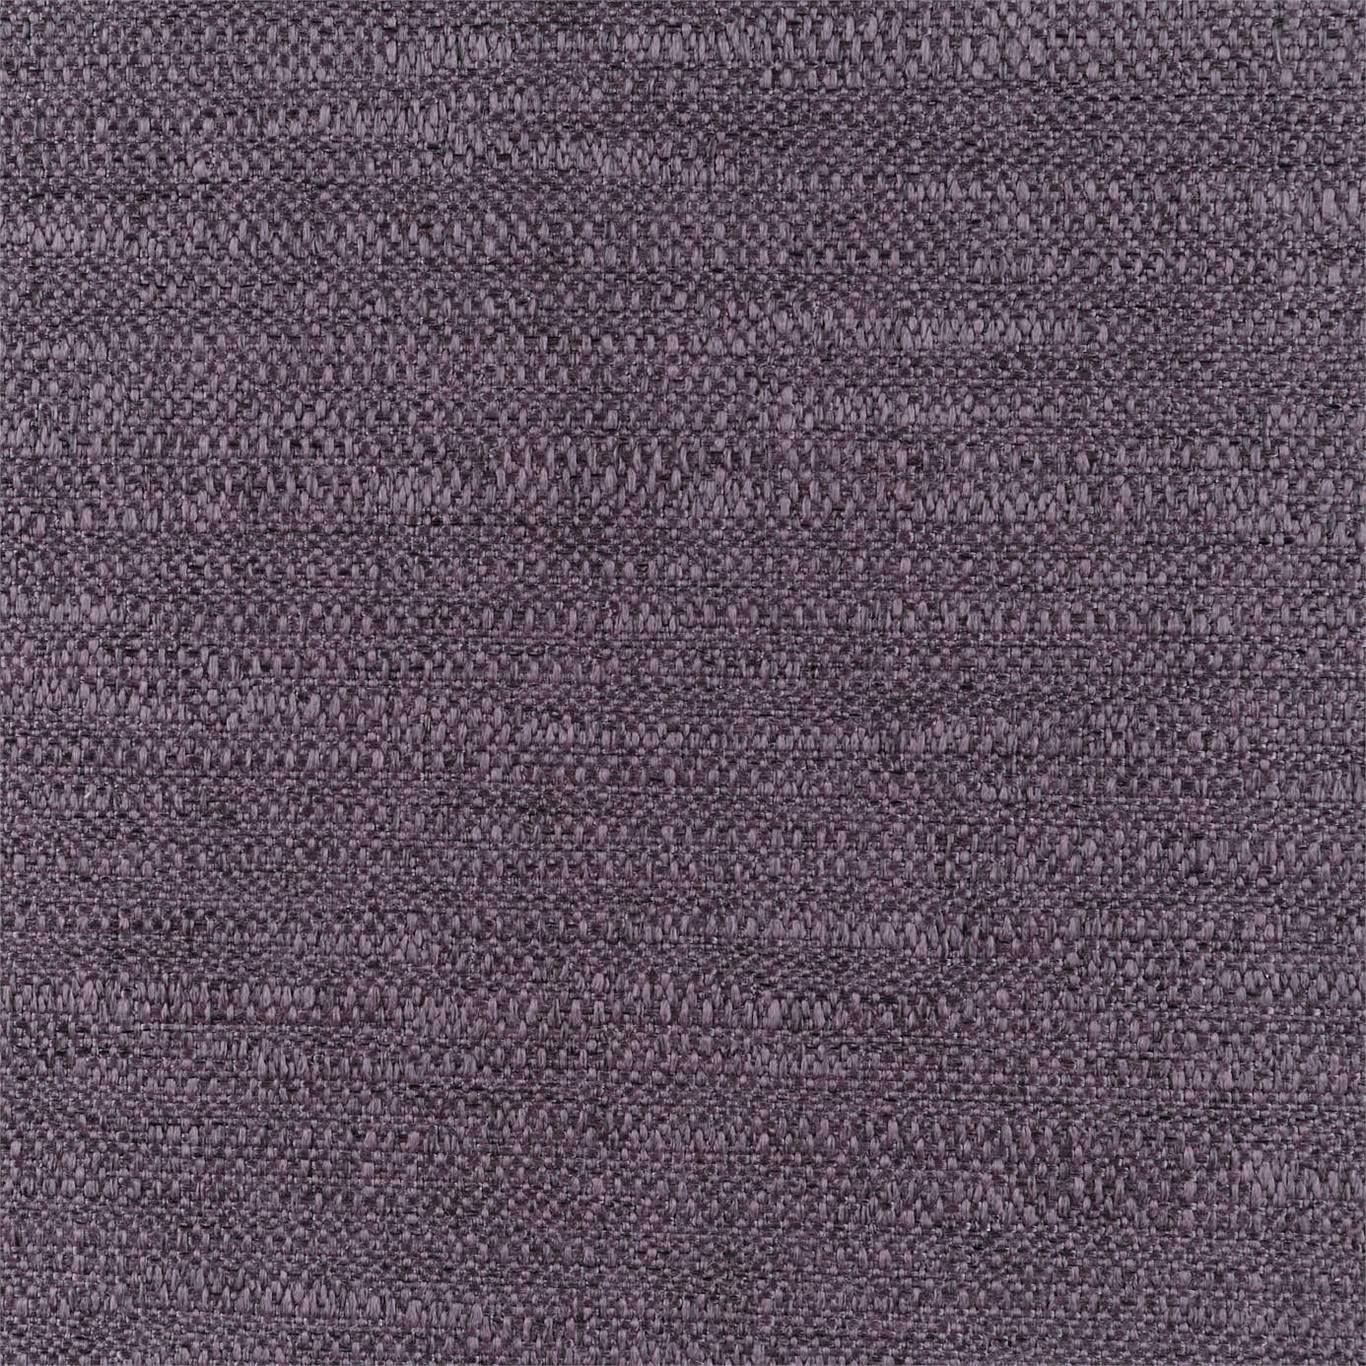 Extensive Grape Fabric by HAR